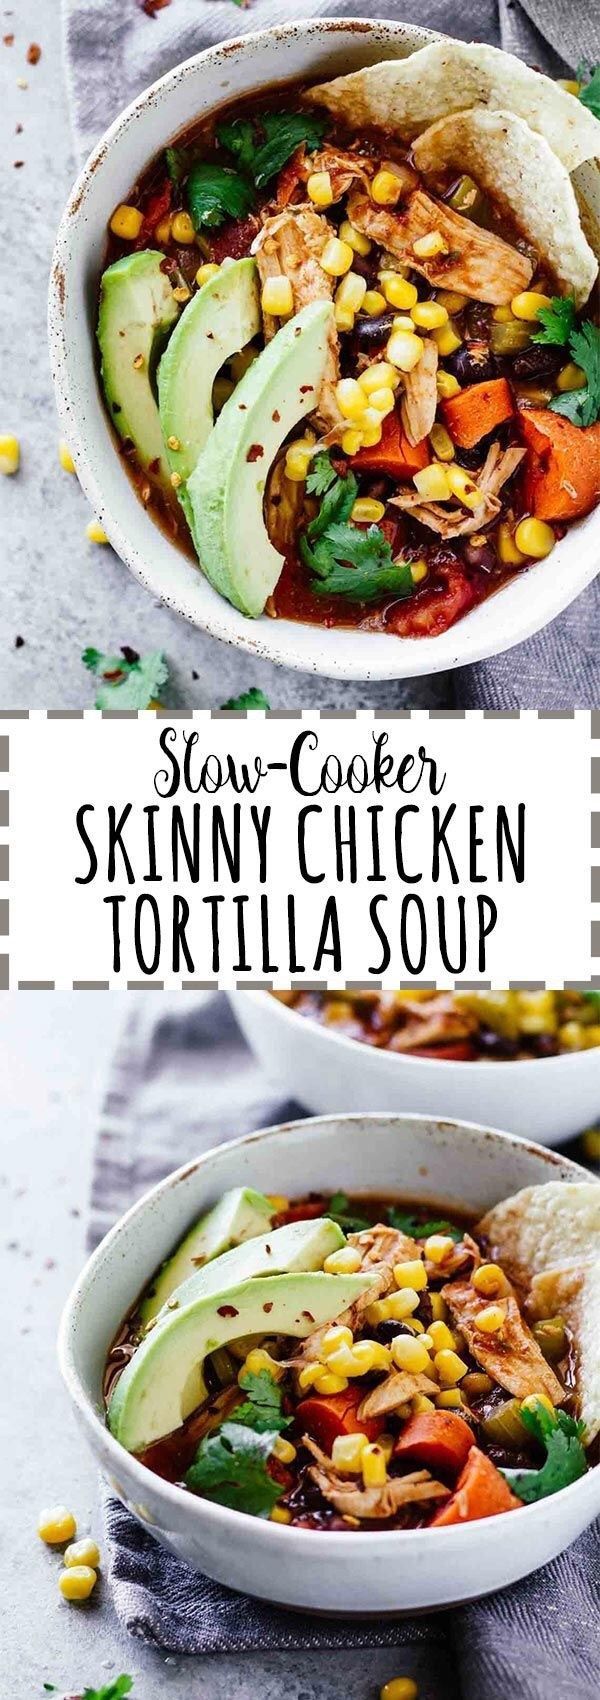 12 healthy recipes Soup fitness ideas